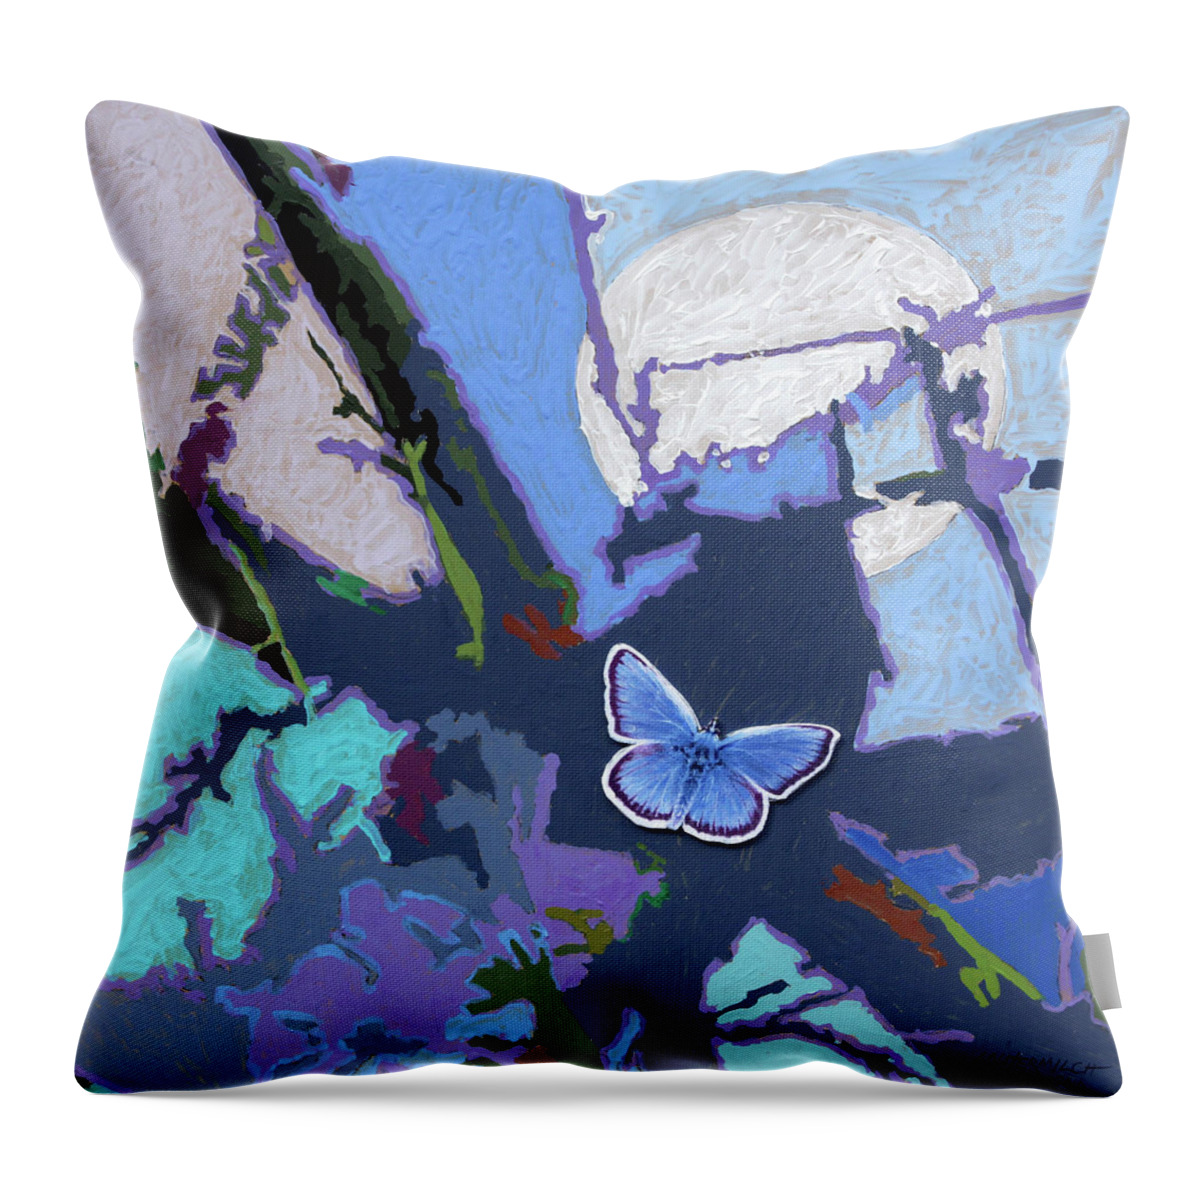 Moon Throw Pillow featuring the painting Flying Towards The Light by John Lautermilch